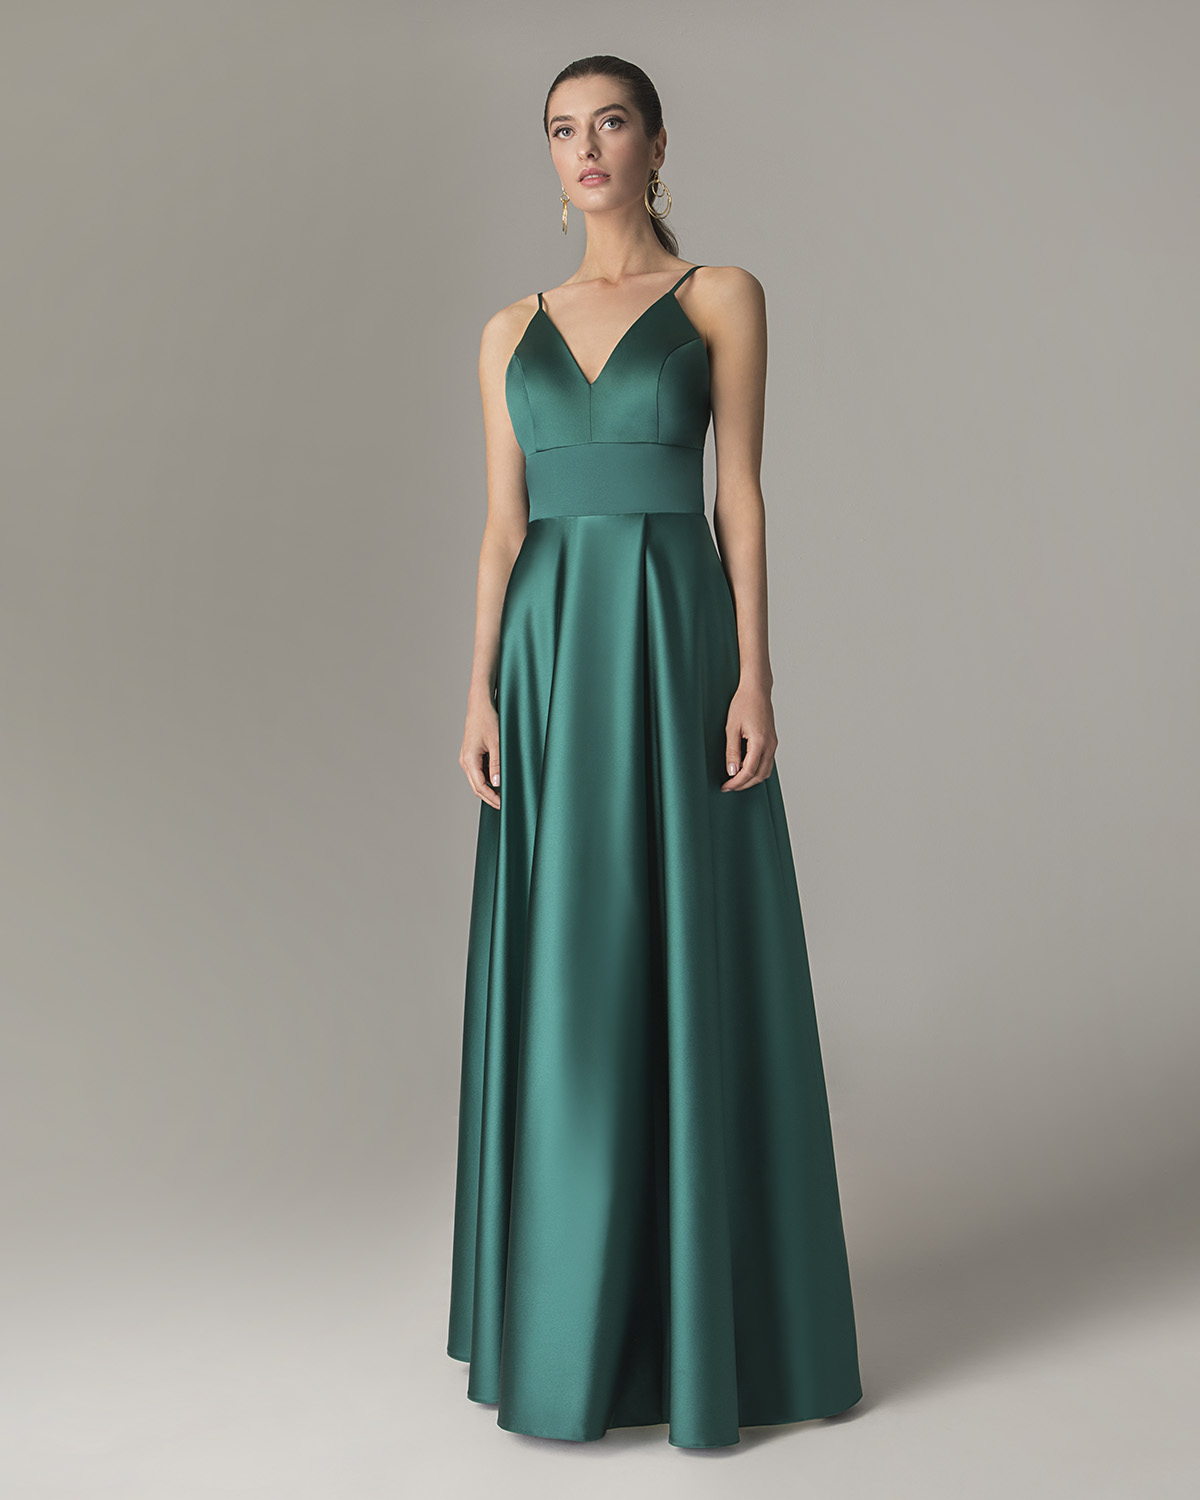 Cocktail Dresses / A long satin cocktail dress with open back